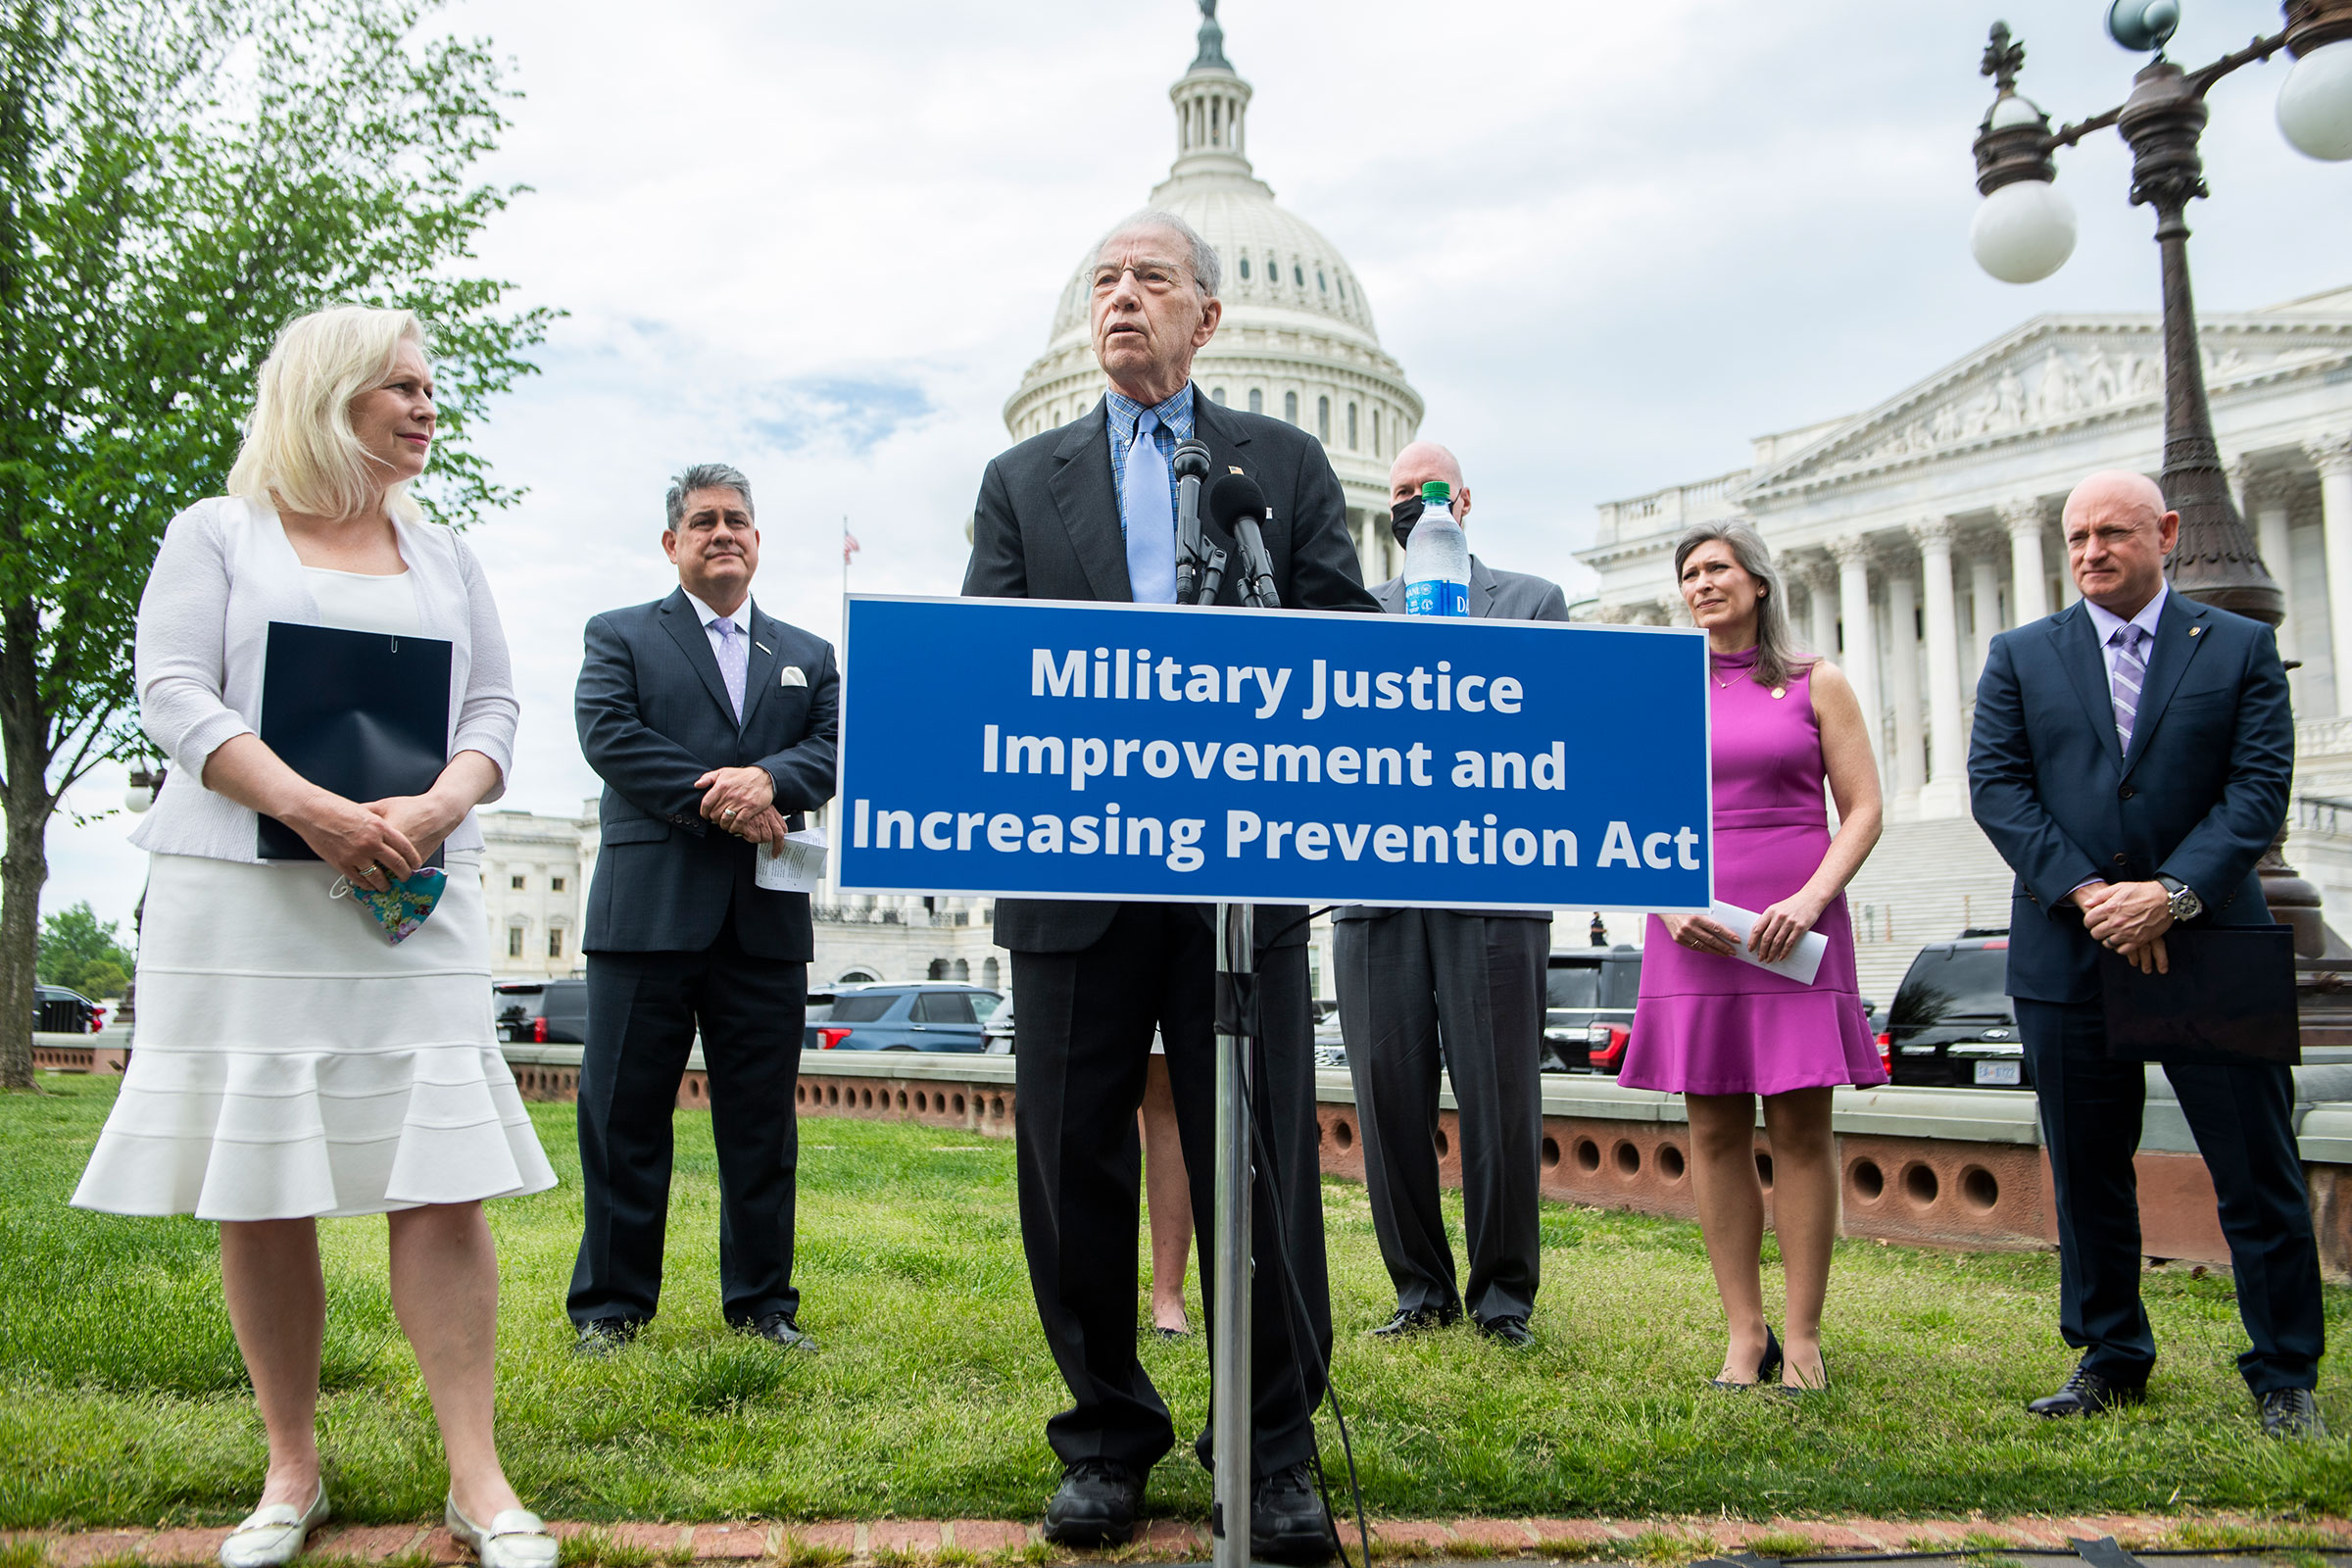 Military Justice Improvement and Increasing Prevention Act